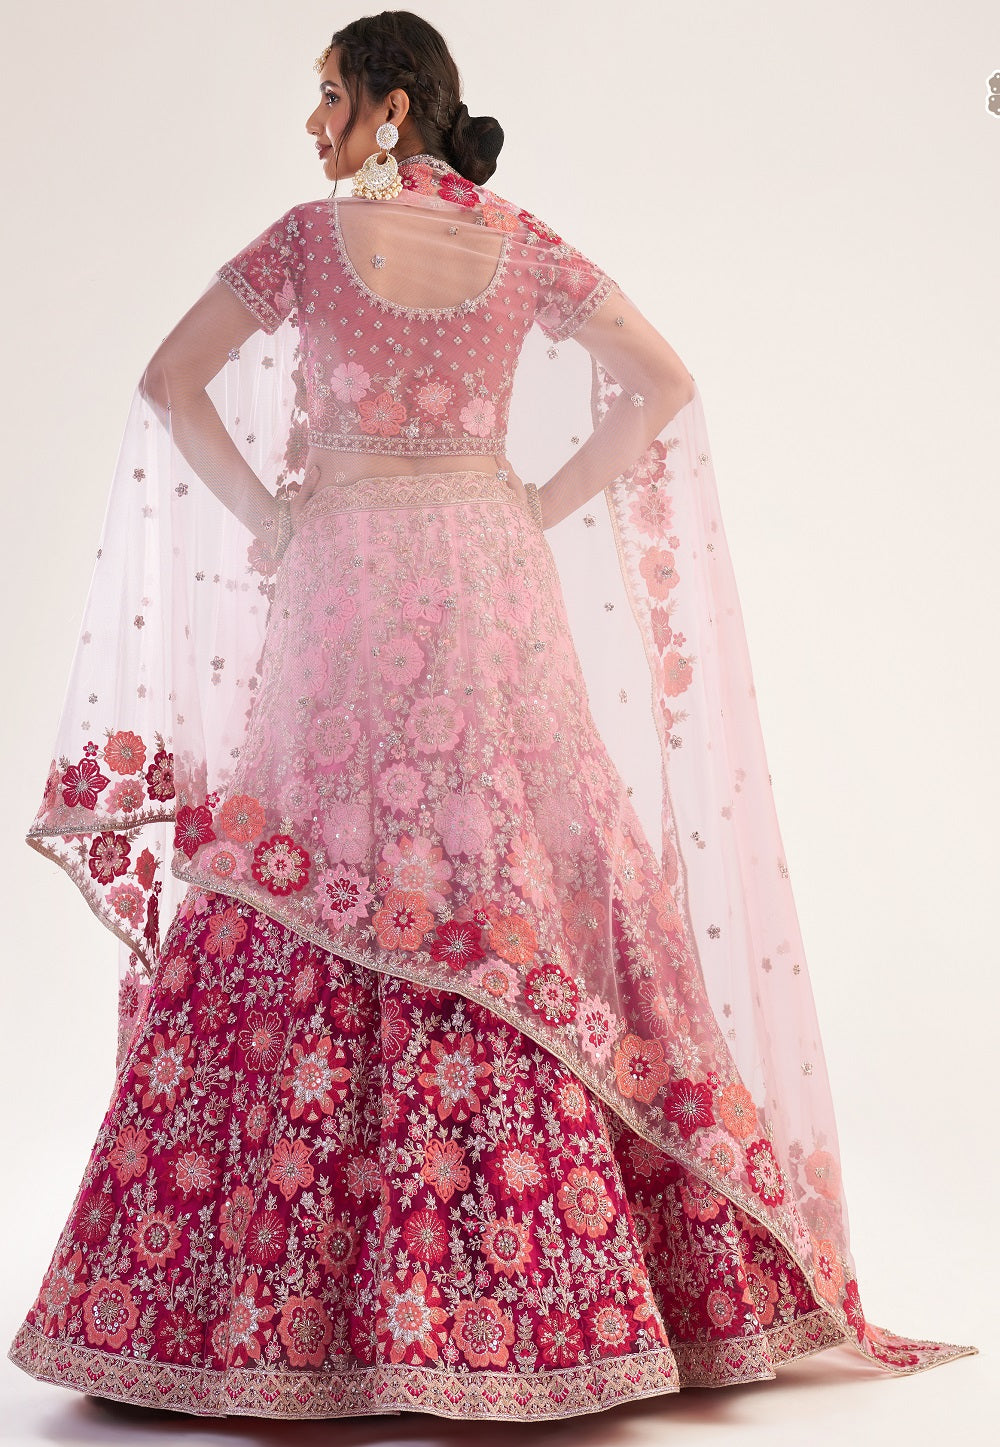 Embroidered Net Lehenga in Shaded Pink and Fuchsia